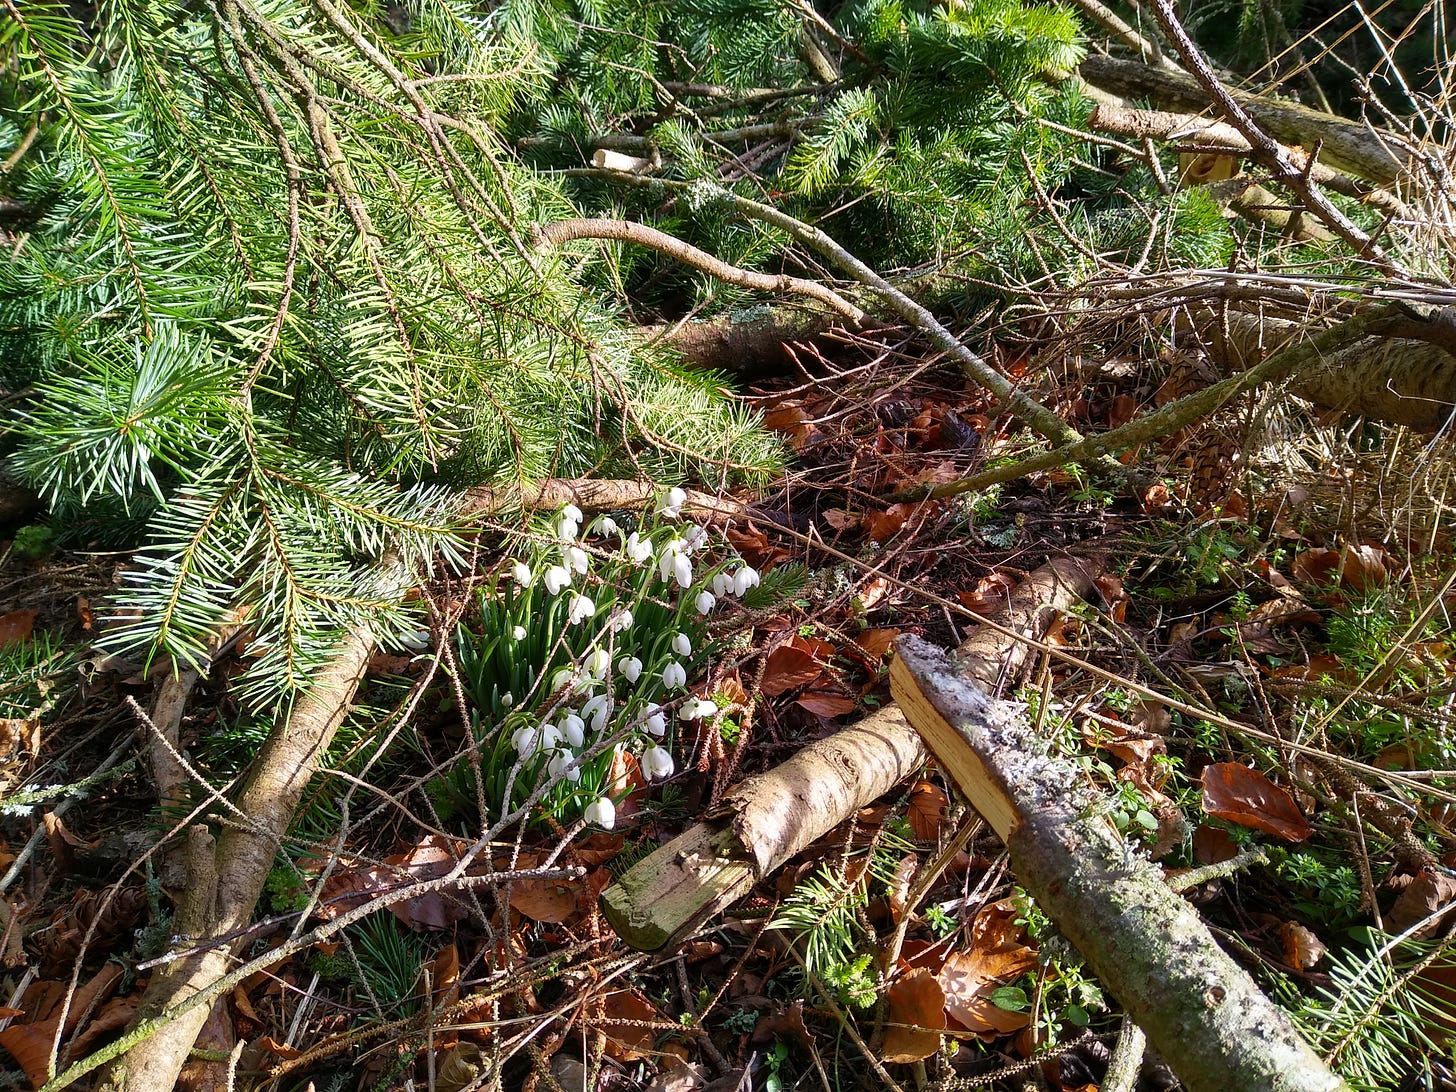 A photograh of some snowdrops that have almost been squashed by a falling tree